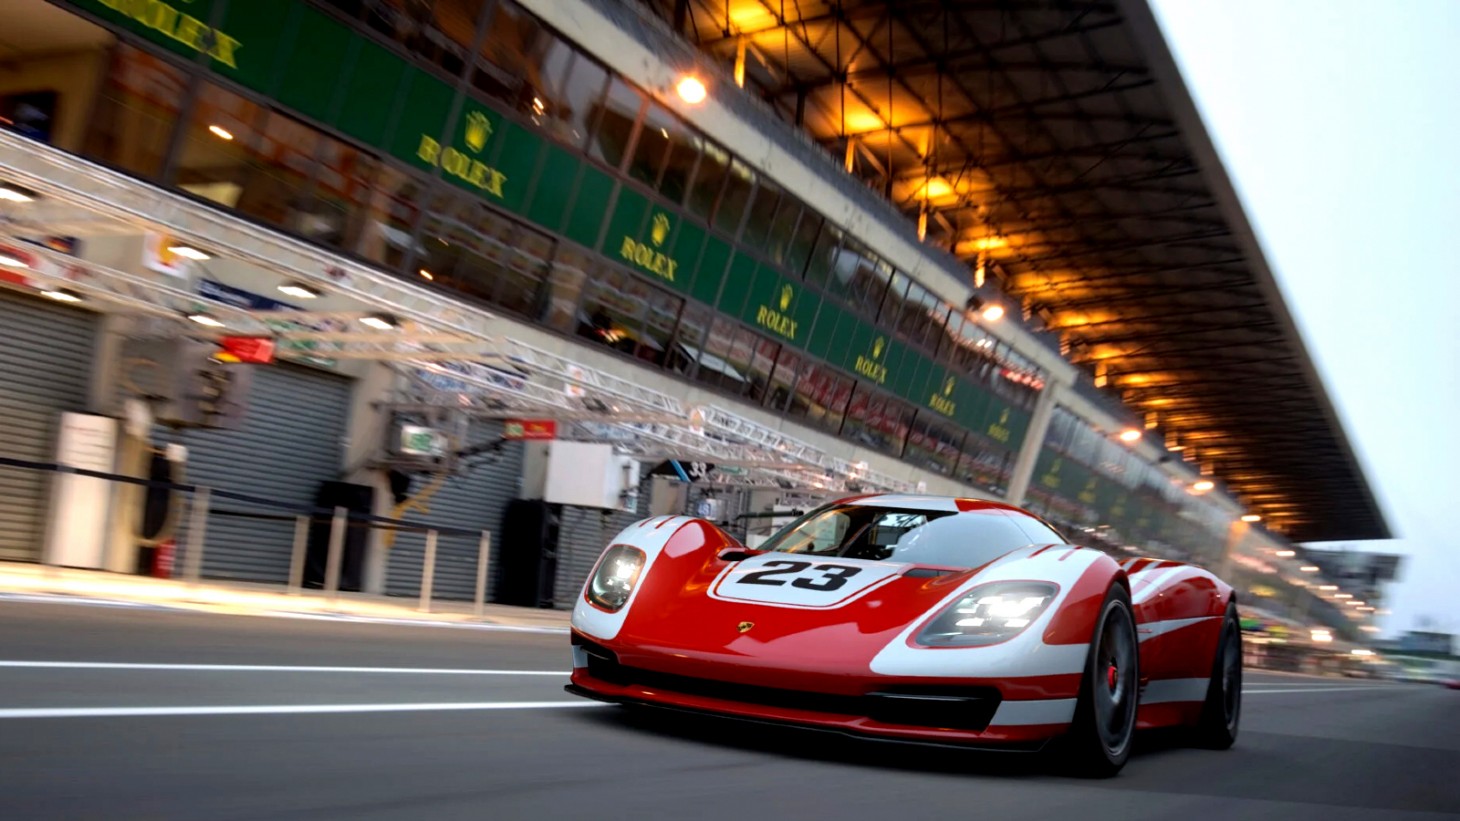 New Gran Turismo 7 Update 1.11 Begins To Fix Credits And Rewards Issues